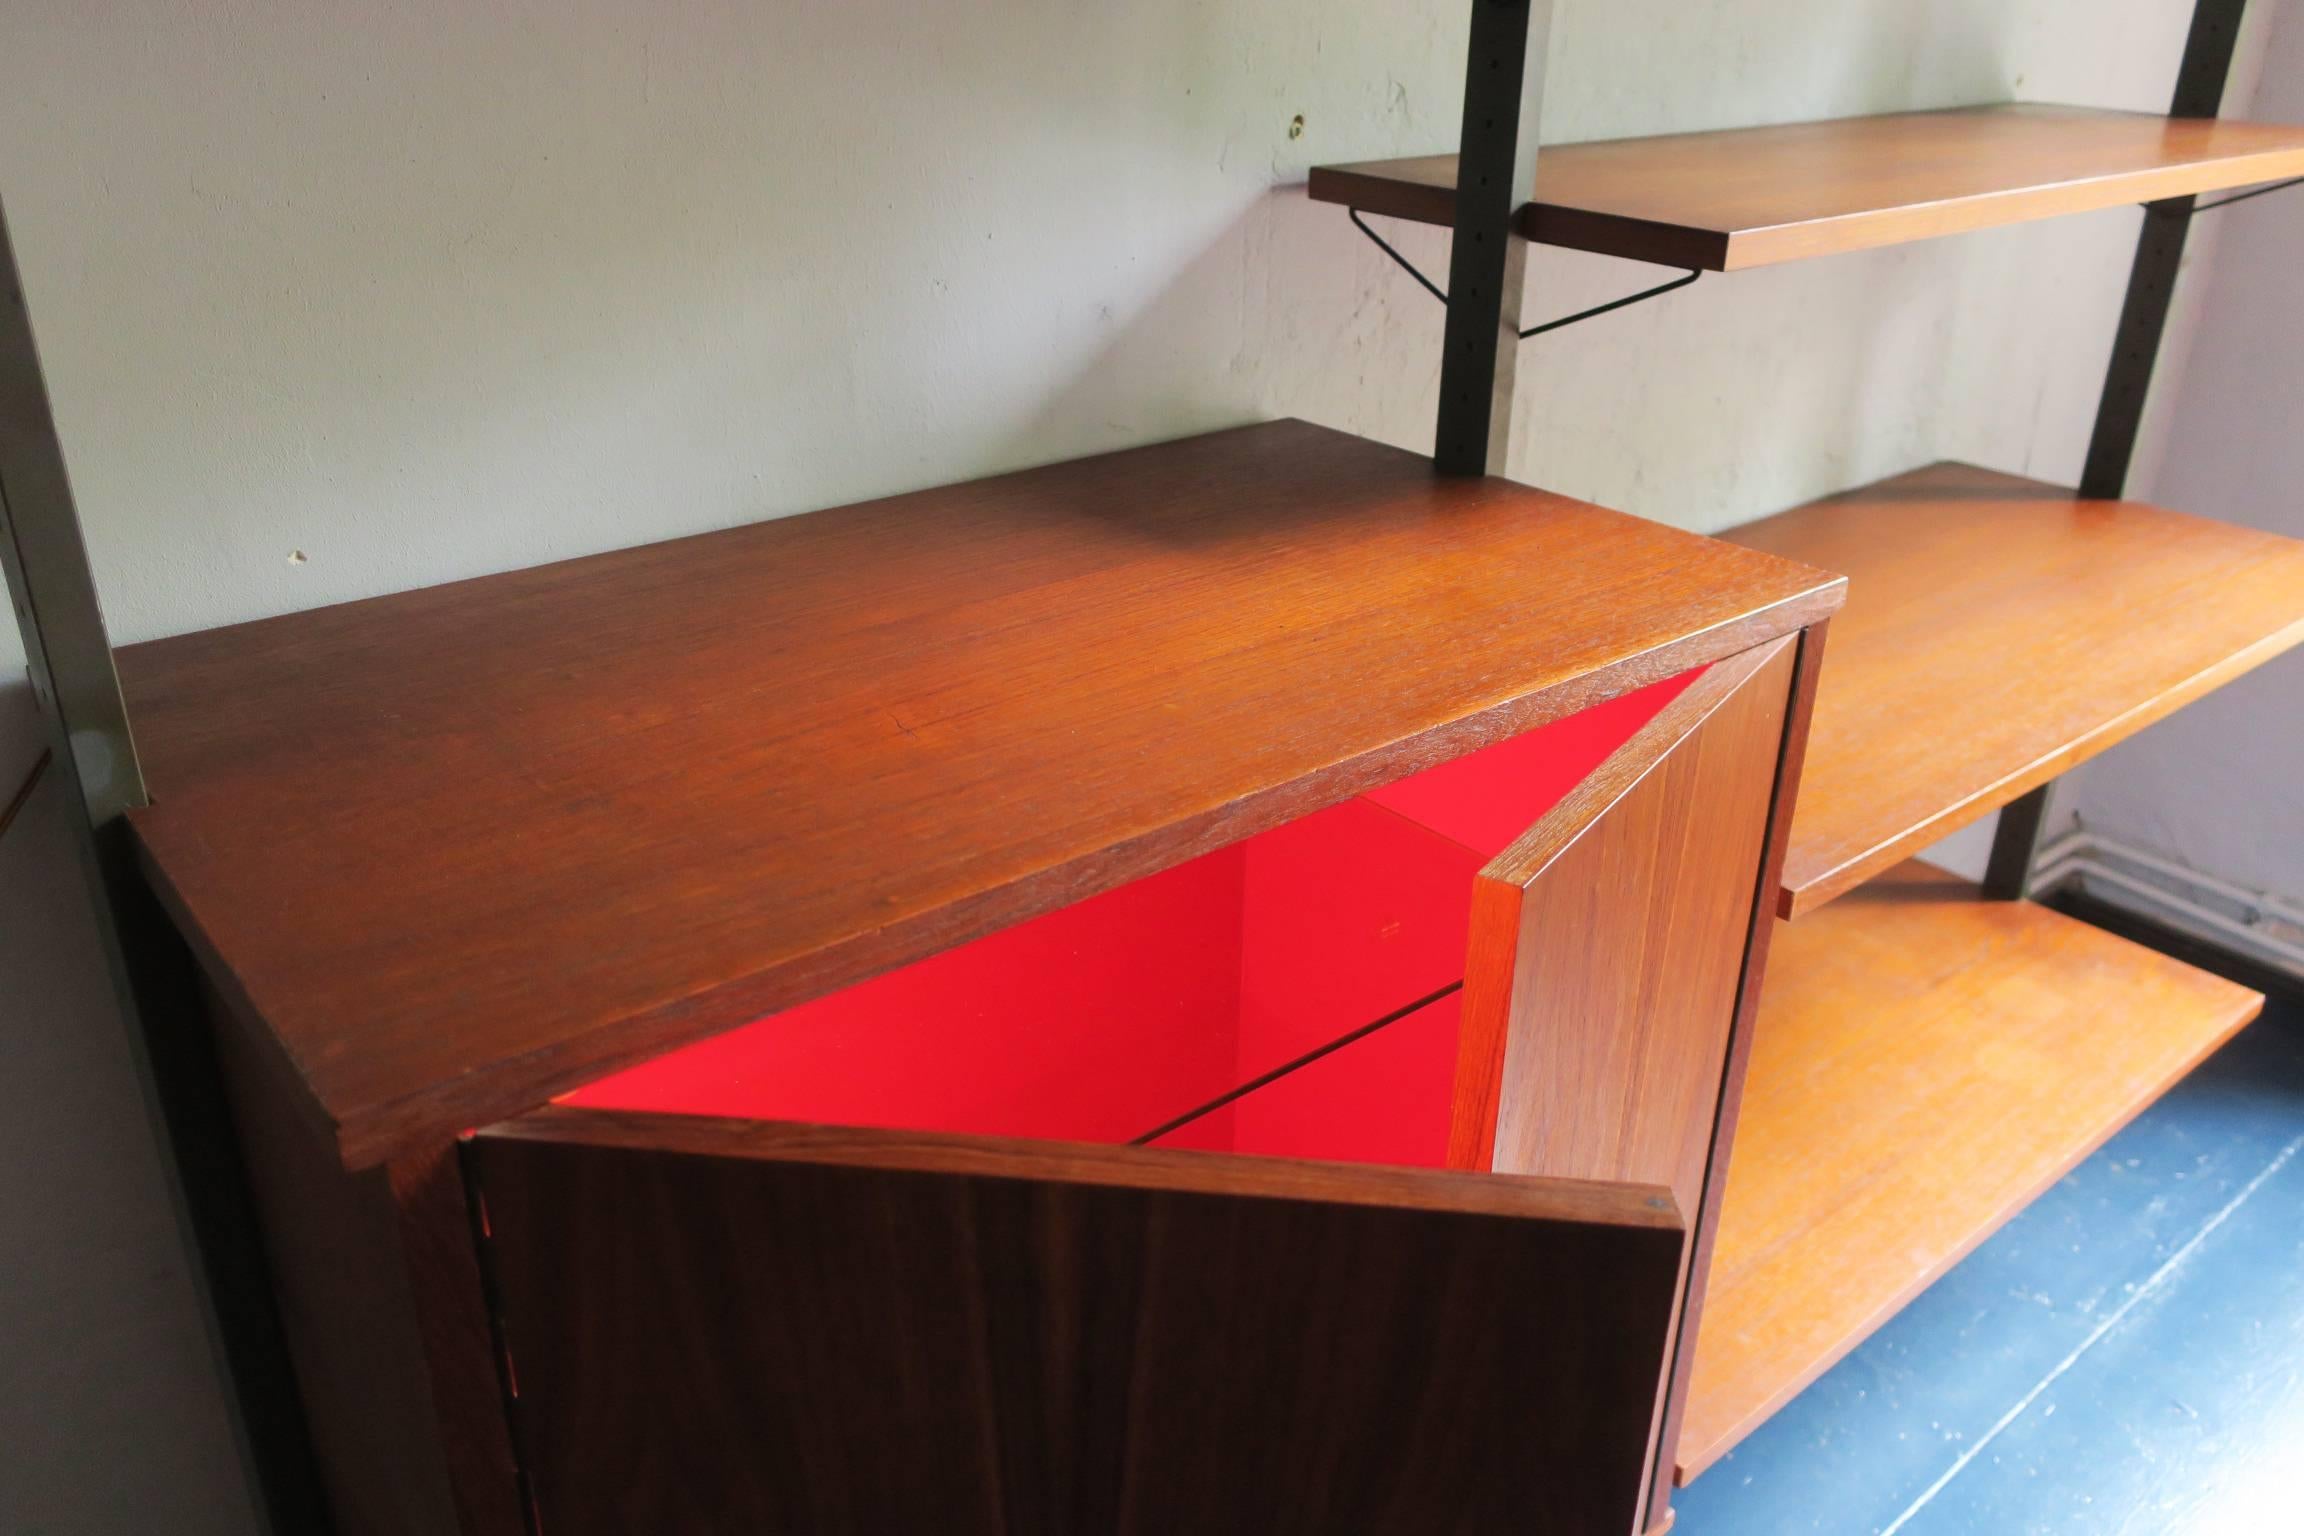 Rare Swedish teak modular shelf system by Olof Pira, 1960s.

One cabinet lights up on opening to reveal the red interior.